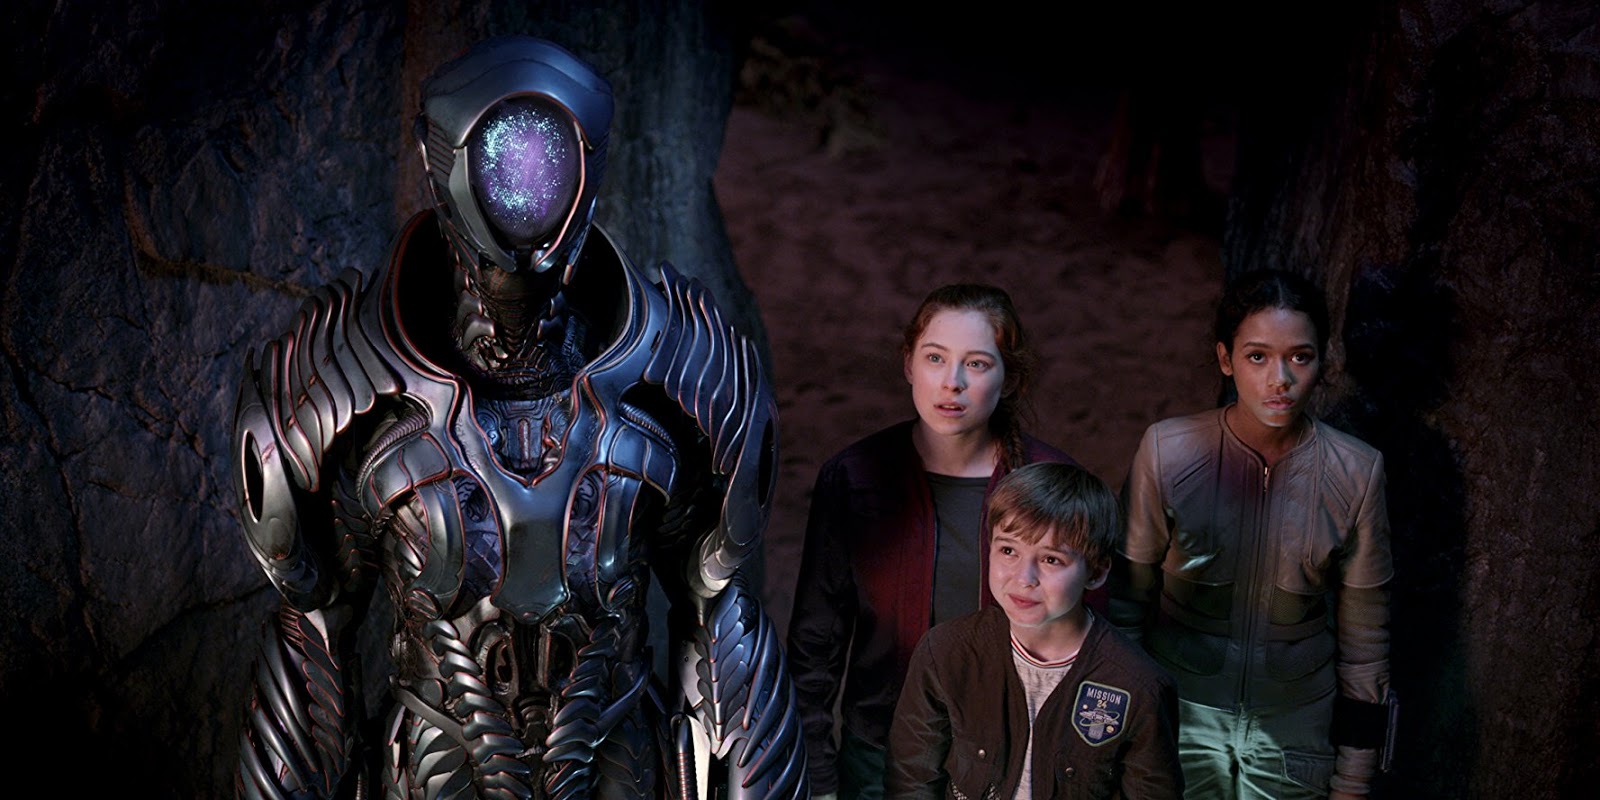 10 TV Shows You Must Watch if You Love Lost in Space